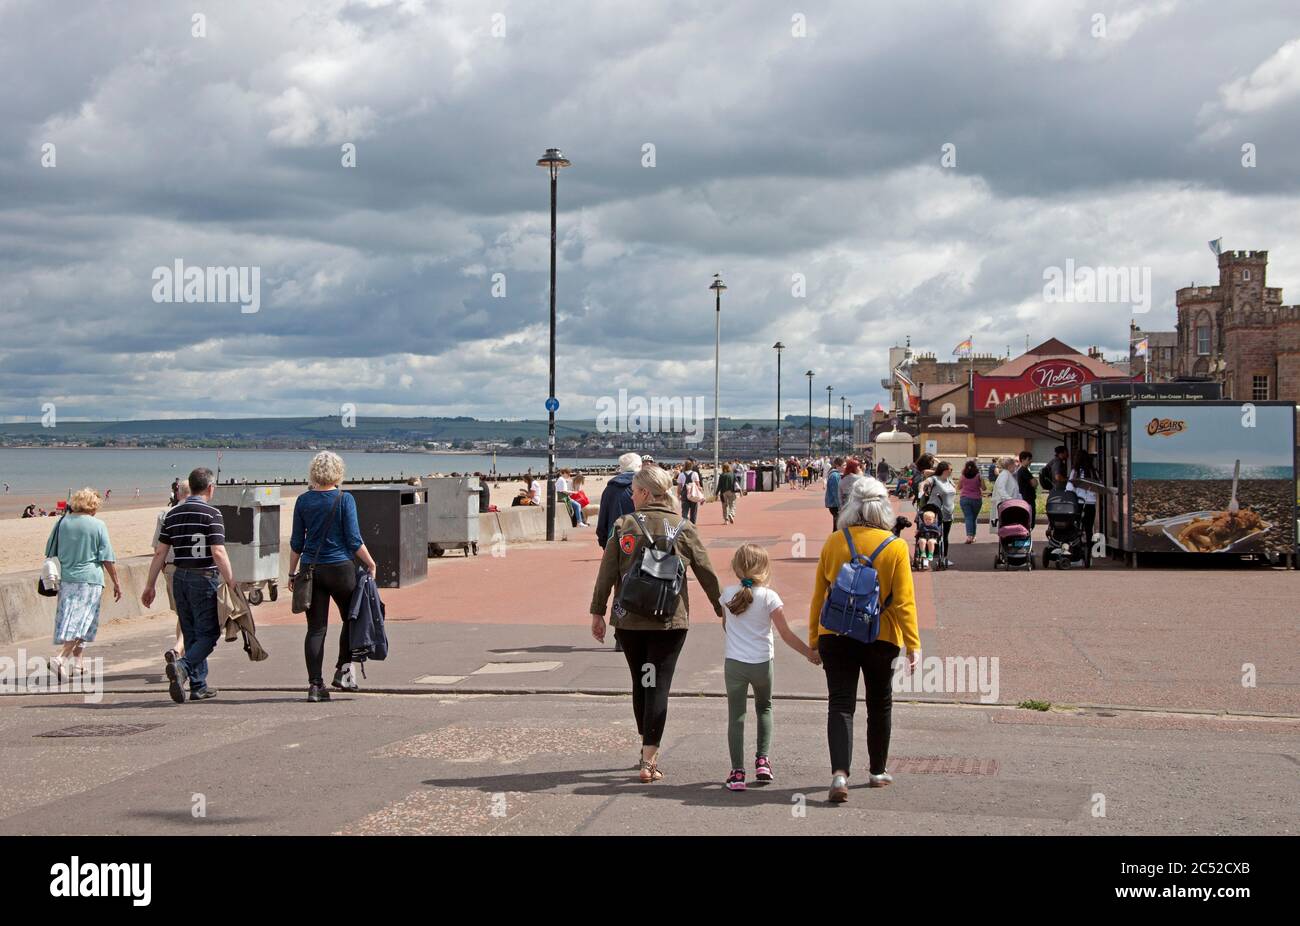 Portobello, Edinburgh, Scotland, UK. 30 June 2020. Today marks 100 days since the UK went into Lockdown due to the Covid-19 Coronavirus pandemic. Looking at Portobello seaside area it is difficult to see that anything has changed from before the shutdown, people are sitting together at tables and on the promenade wall, they are buying their coffee and snacks from the kiosks and cafes. Although the temperature was 18 degrees at lunchtime there were fewer people on the beach than on the promenade. Stock Photo